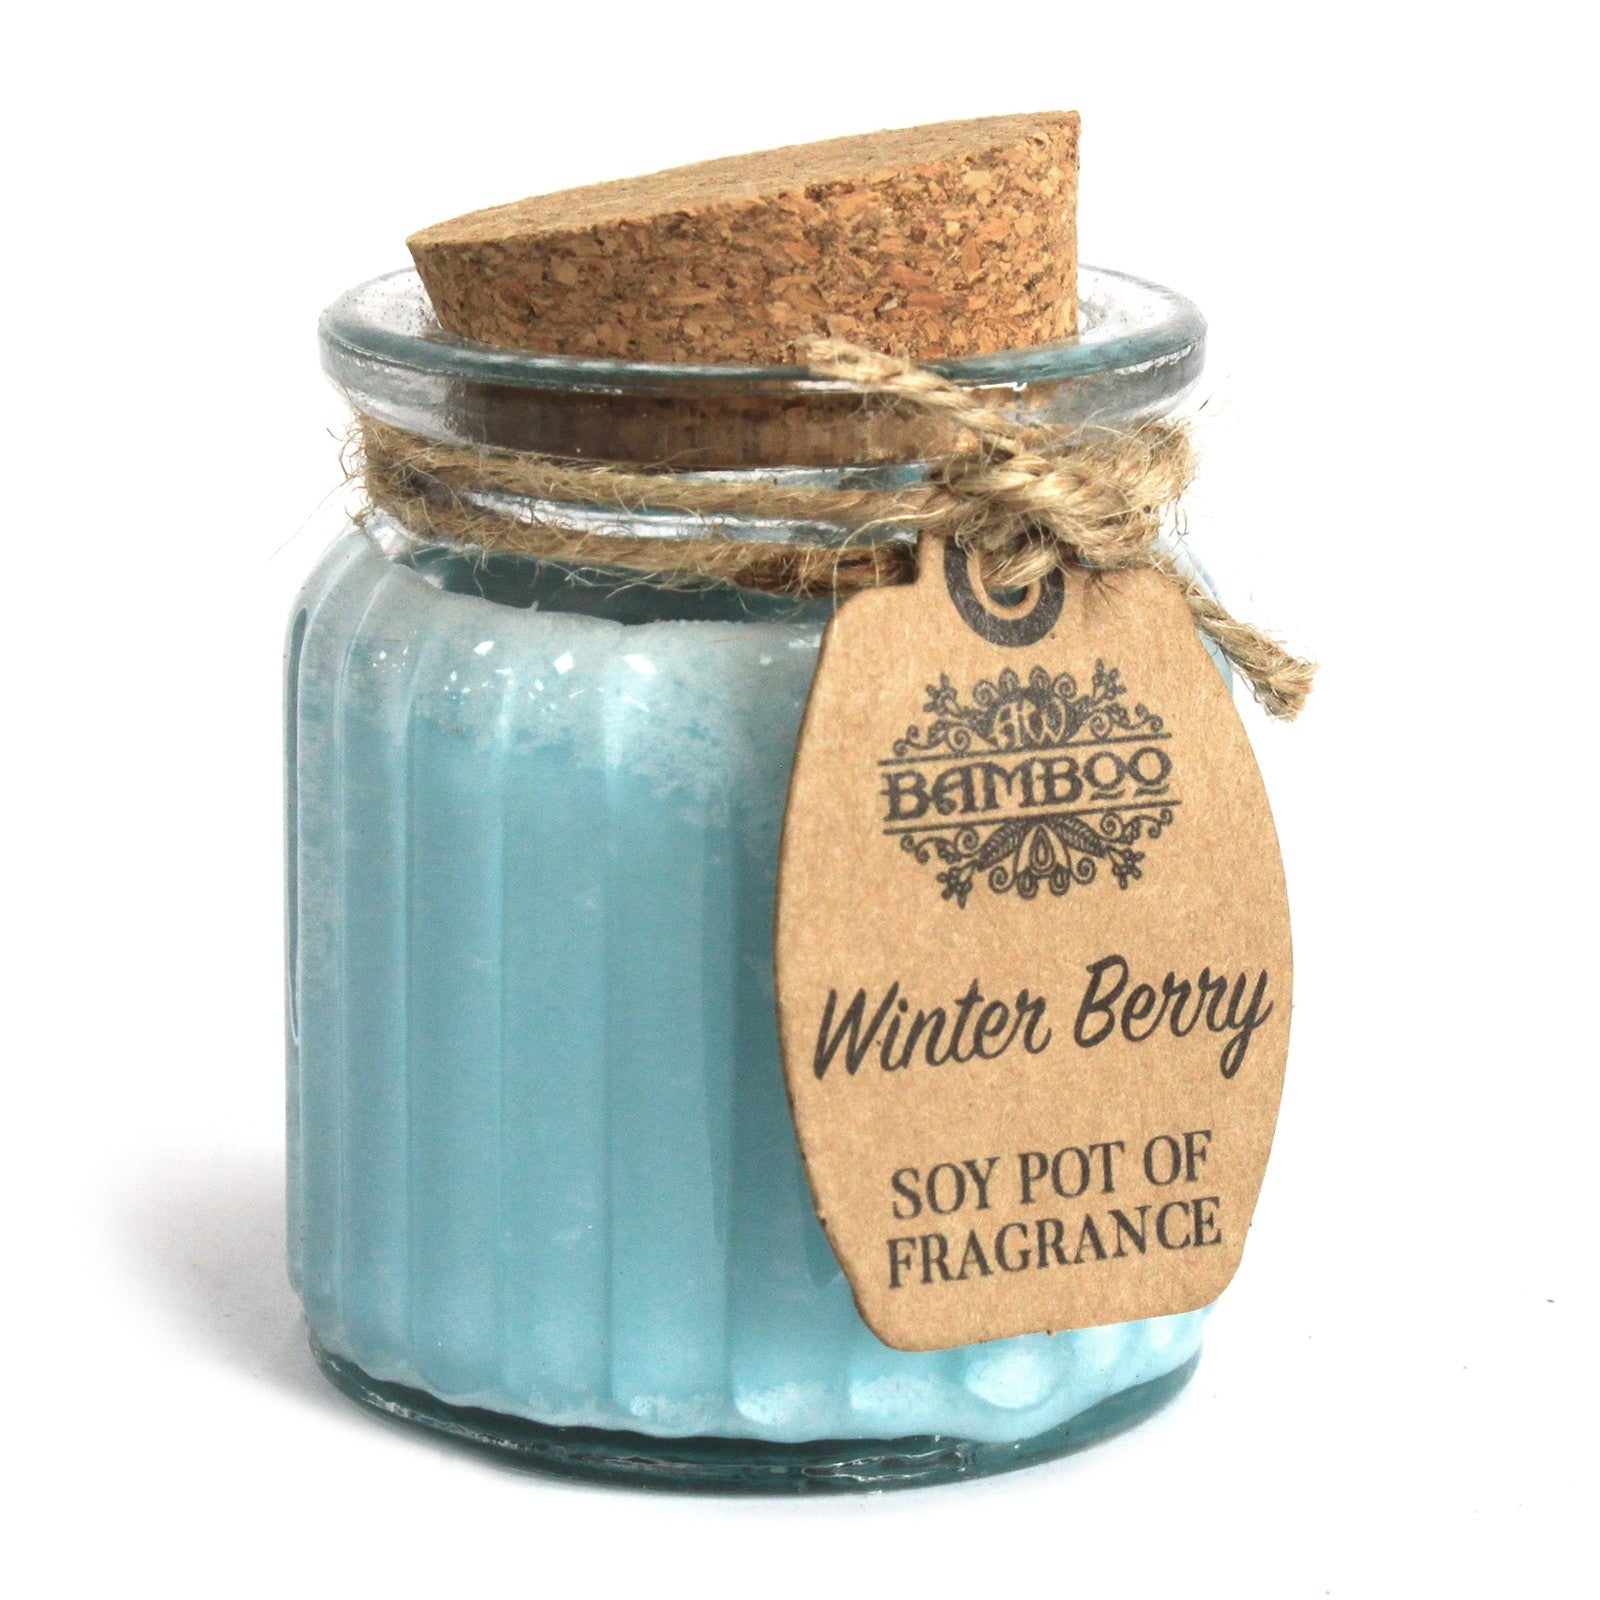 View Winter Berry Soy Pot of Fragrance Candles information